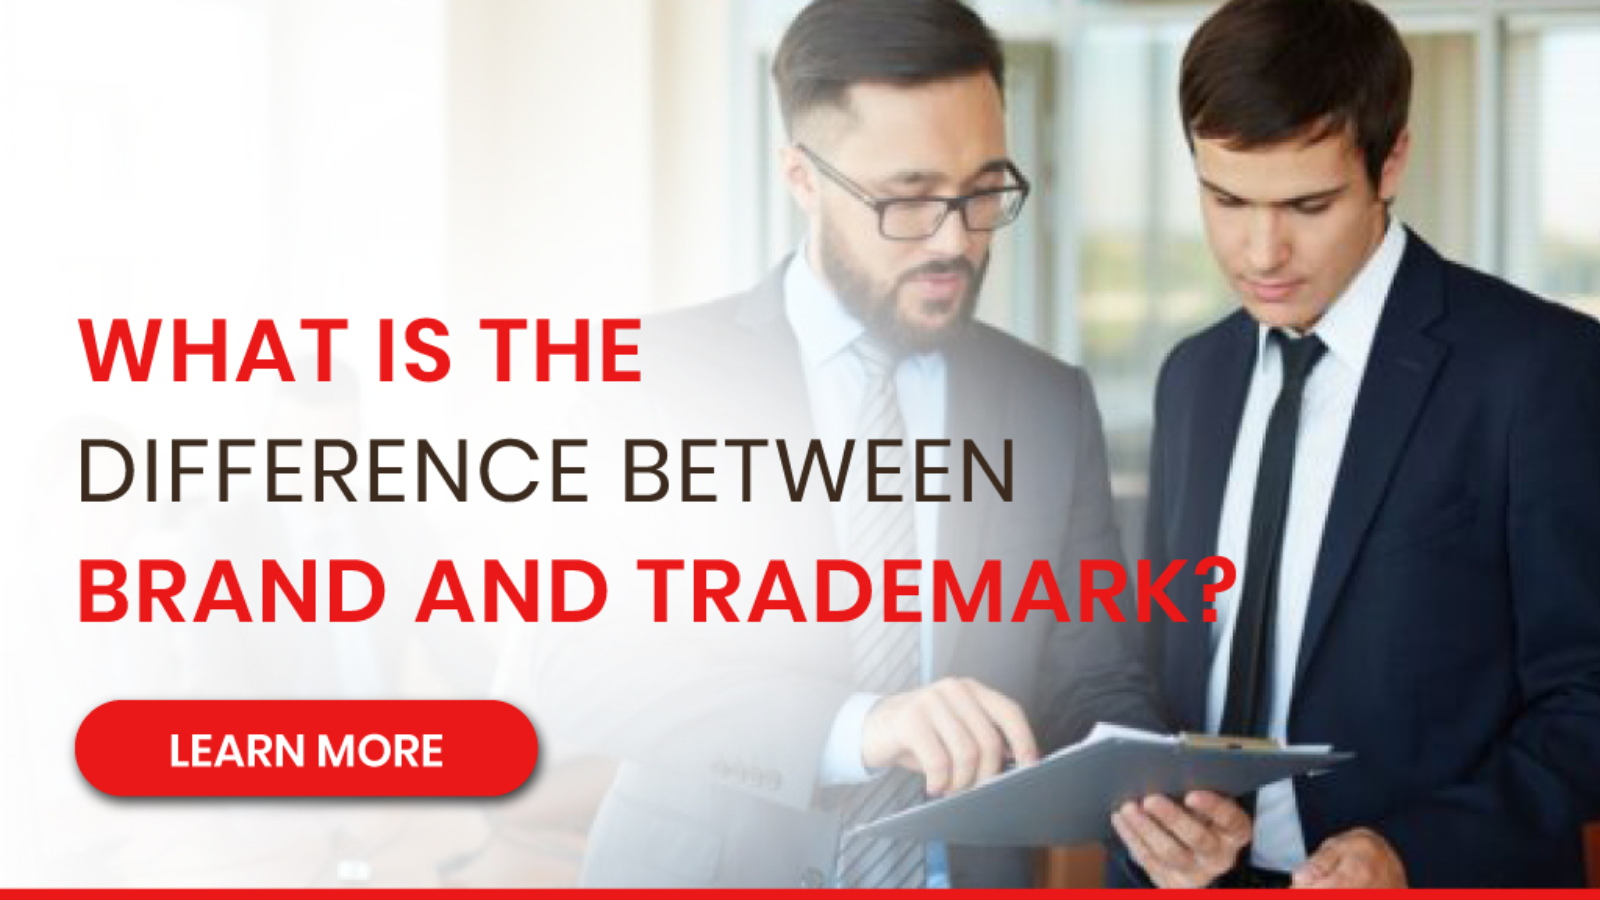 Difference Between Brand and Trademark